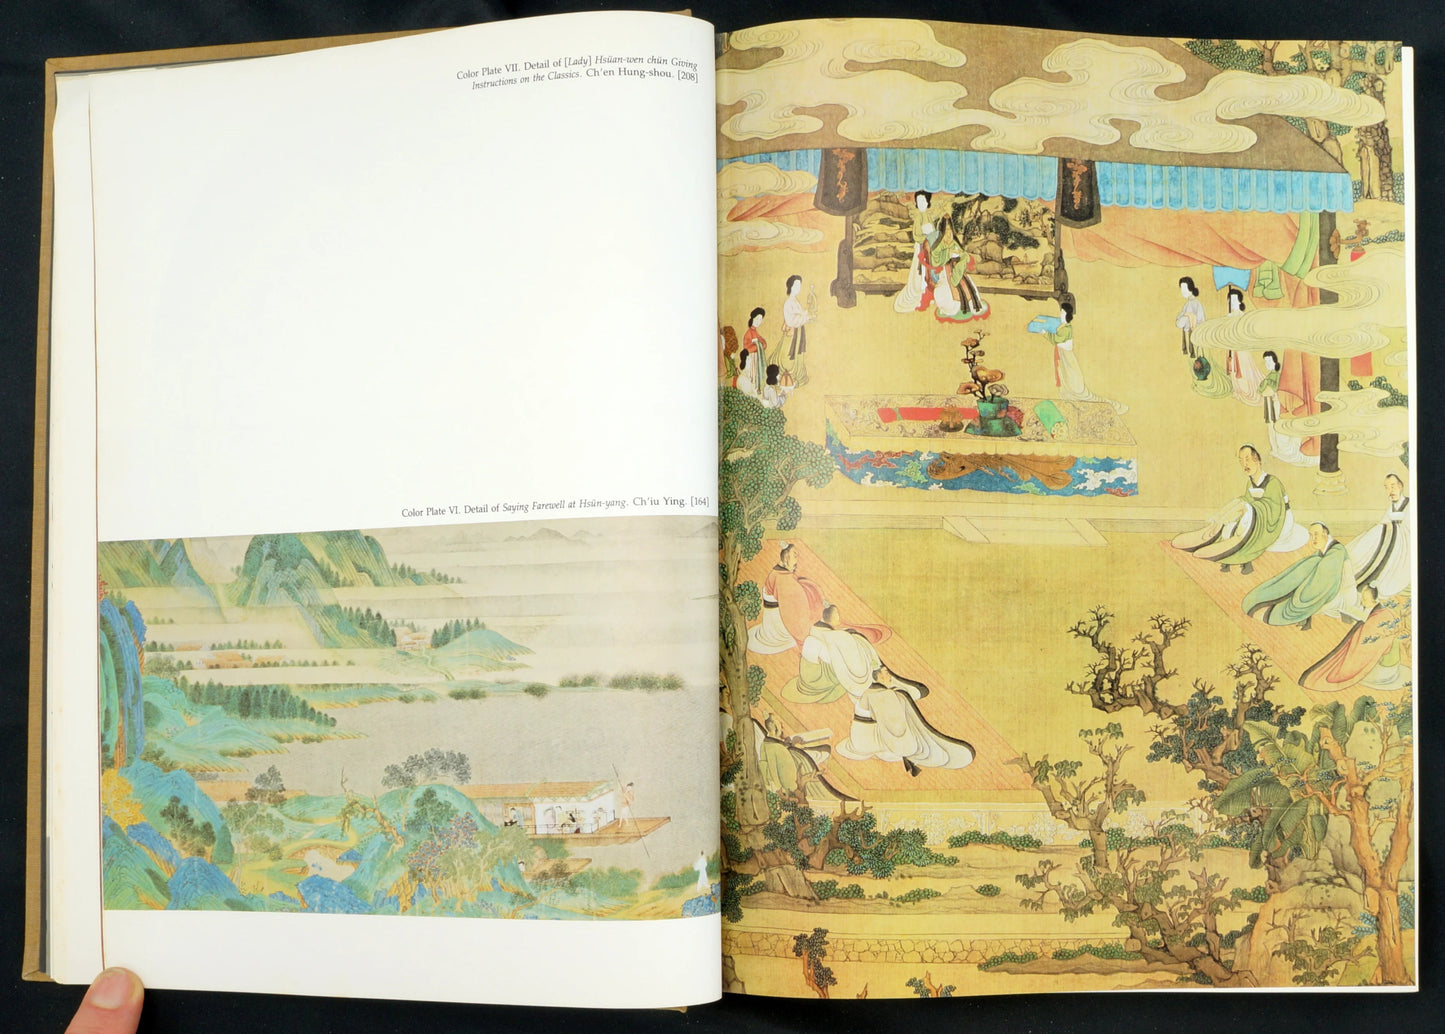 Eight Dynasties of Chinese Painting – Cleveland Museum of Art - Bear and Raven Antiques